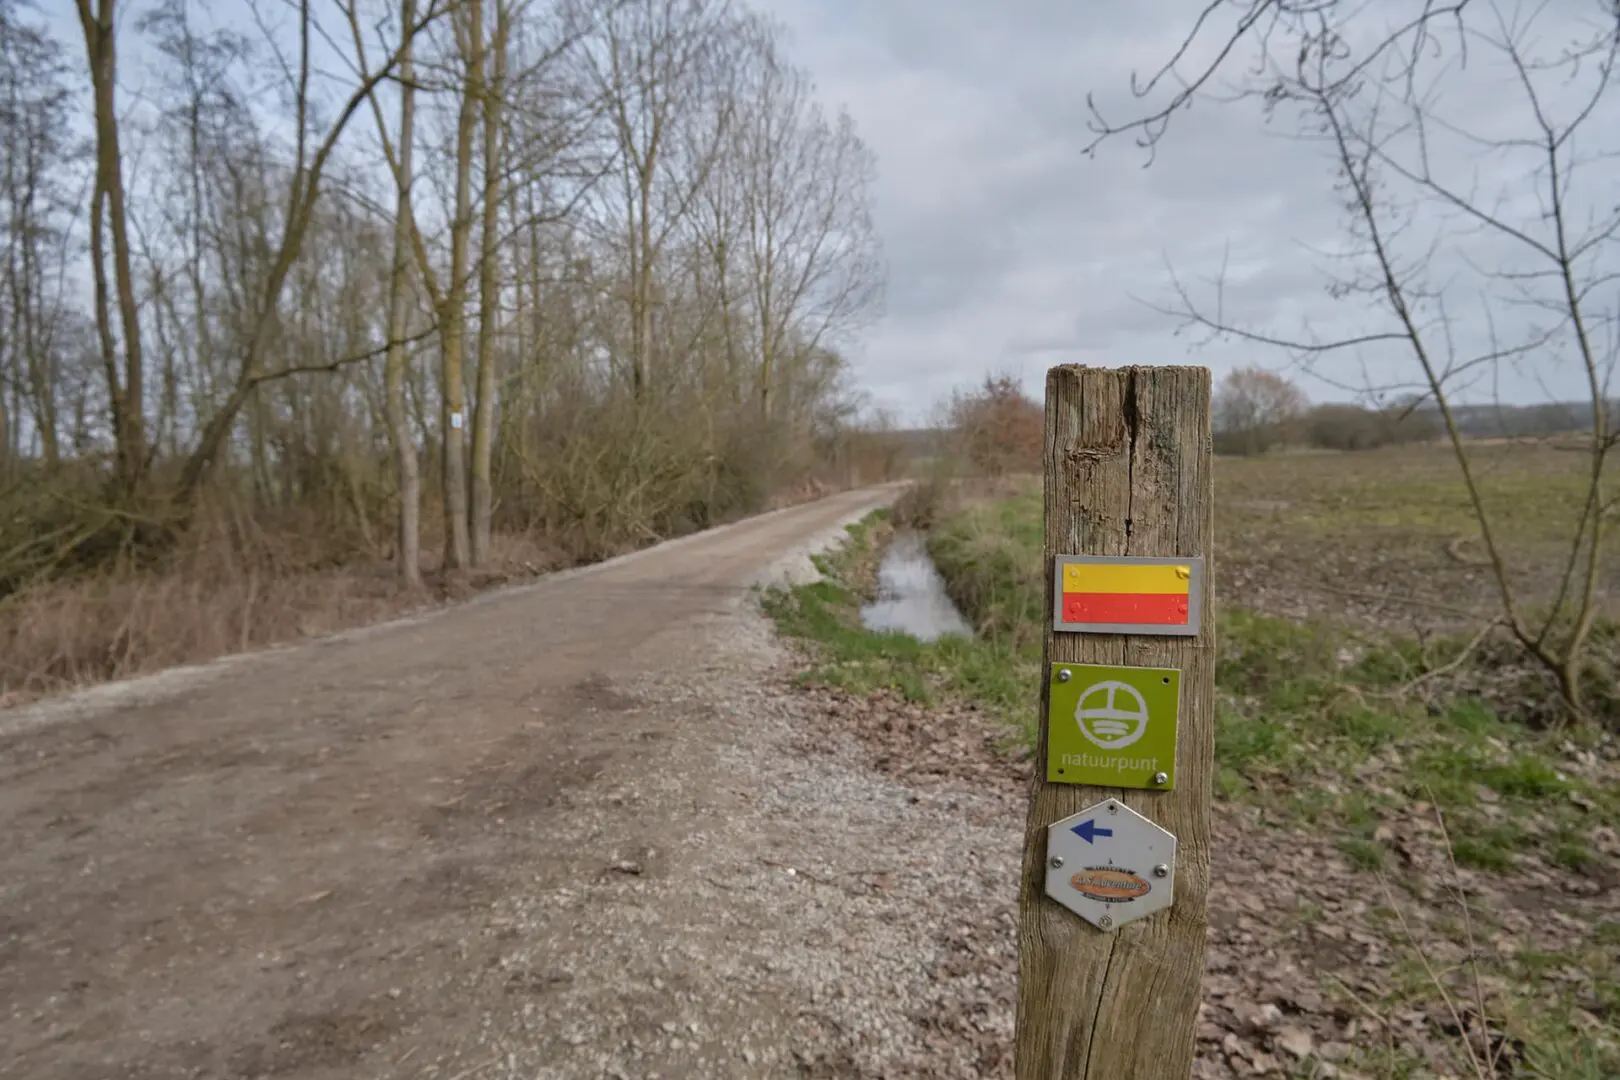 Wooden pole with trail signs on it with gravel path in the background